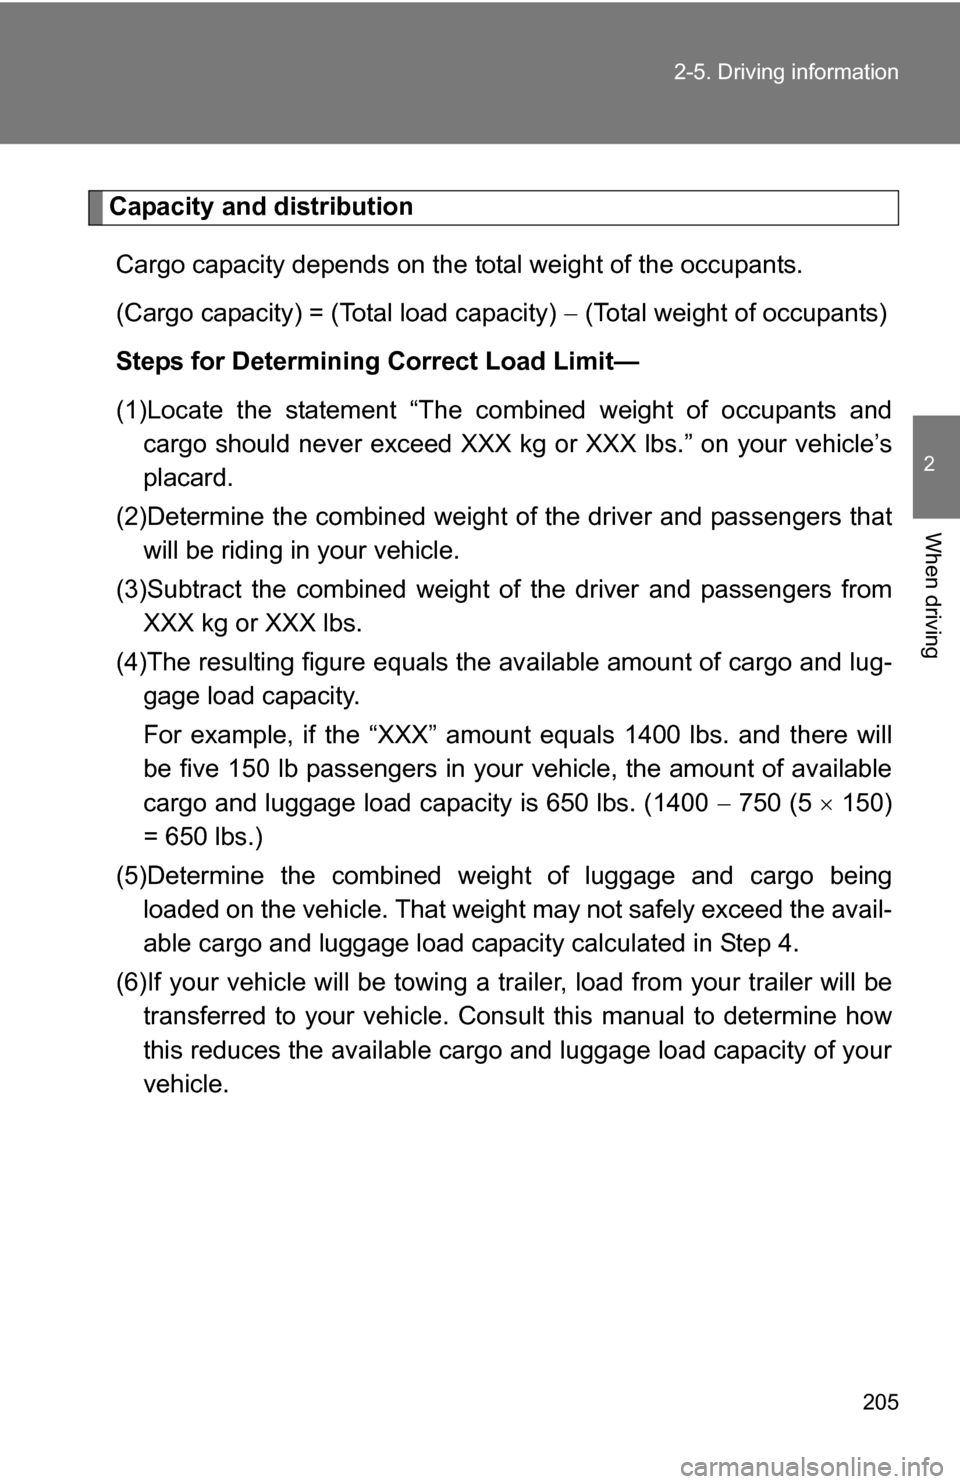 TOYOTA 4RUNNER 2009 N280 / 5.G Owners Manual 205
2-5. Driving information
2
When driving
Capacity and distribution
Cargo capacity depends on the total weight of the occupants.
(Cargo capacity) = (Total load capacity)   (Total weight of occupa